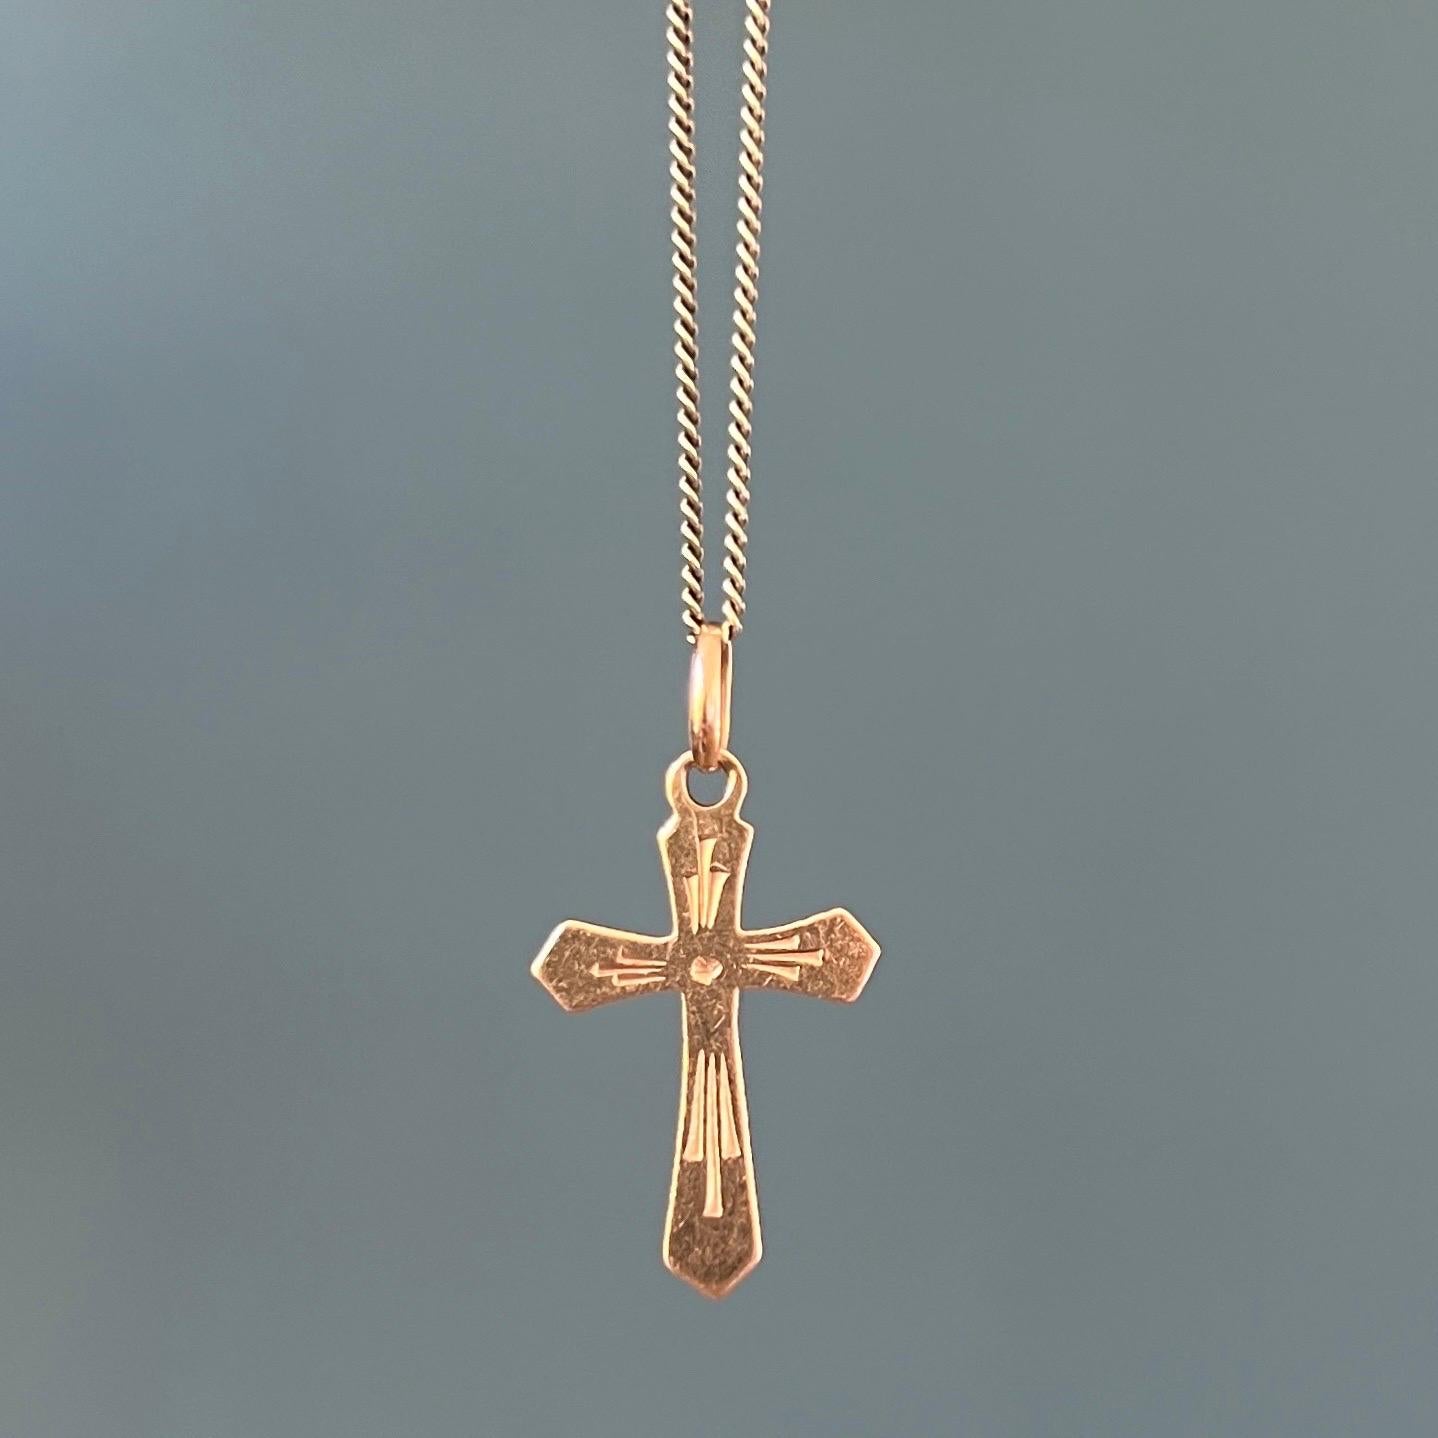 An Italian 18 karat gold cross charm pendant. This vintage religious cross charm has a beautiful design with engraved details. Charms are great to collect as wearable memories, it has a symbolic and often a sentimental value. They can be added to